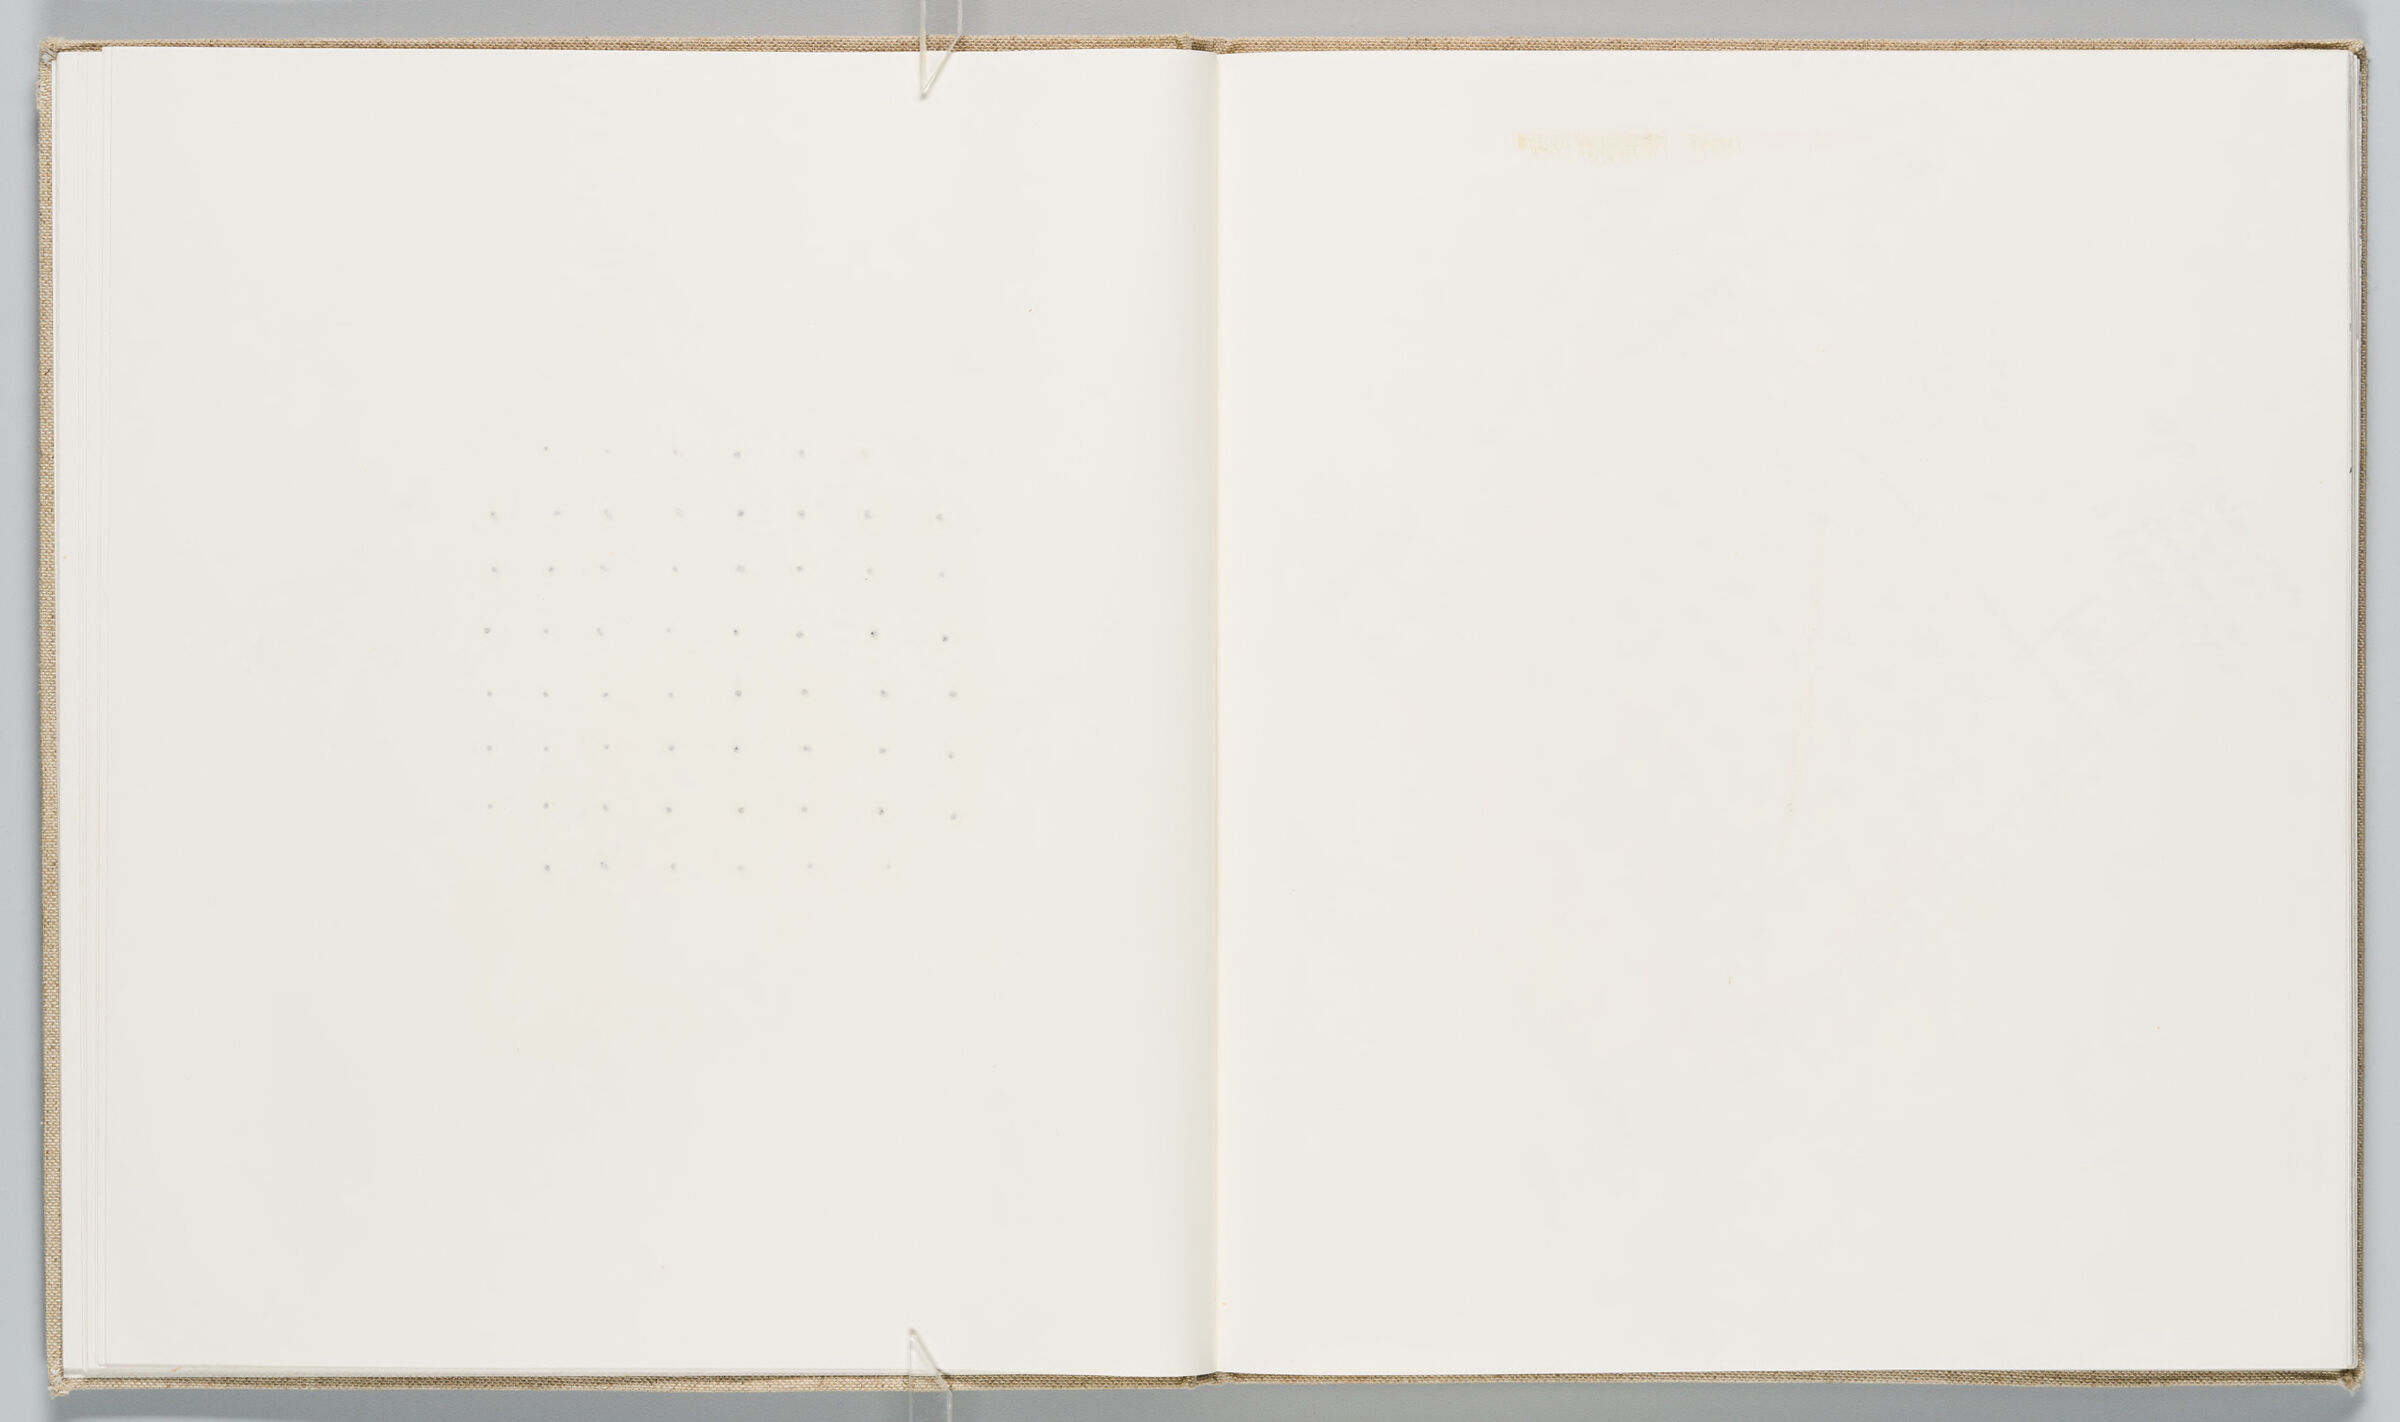 Untitled (Bleed-Through Of Previous Page, Left Page); Untitled (Blank With Adhesive Traces, Right Page)